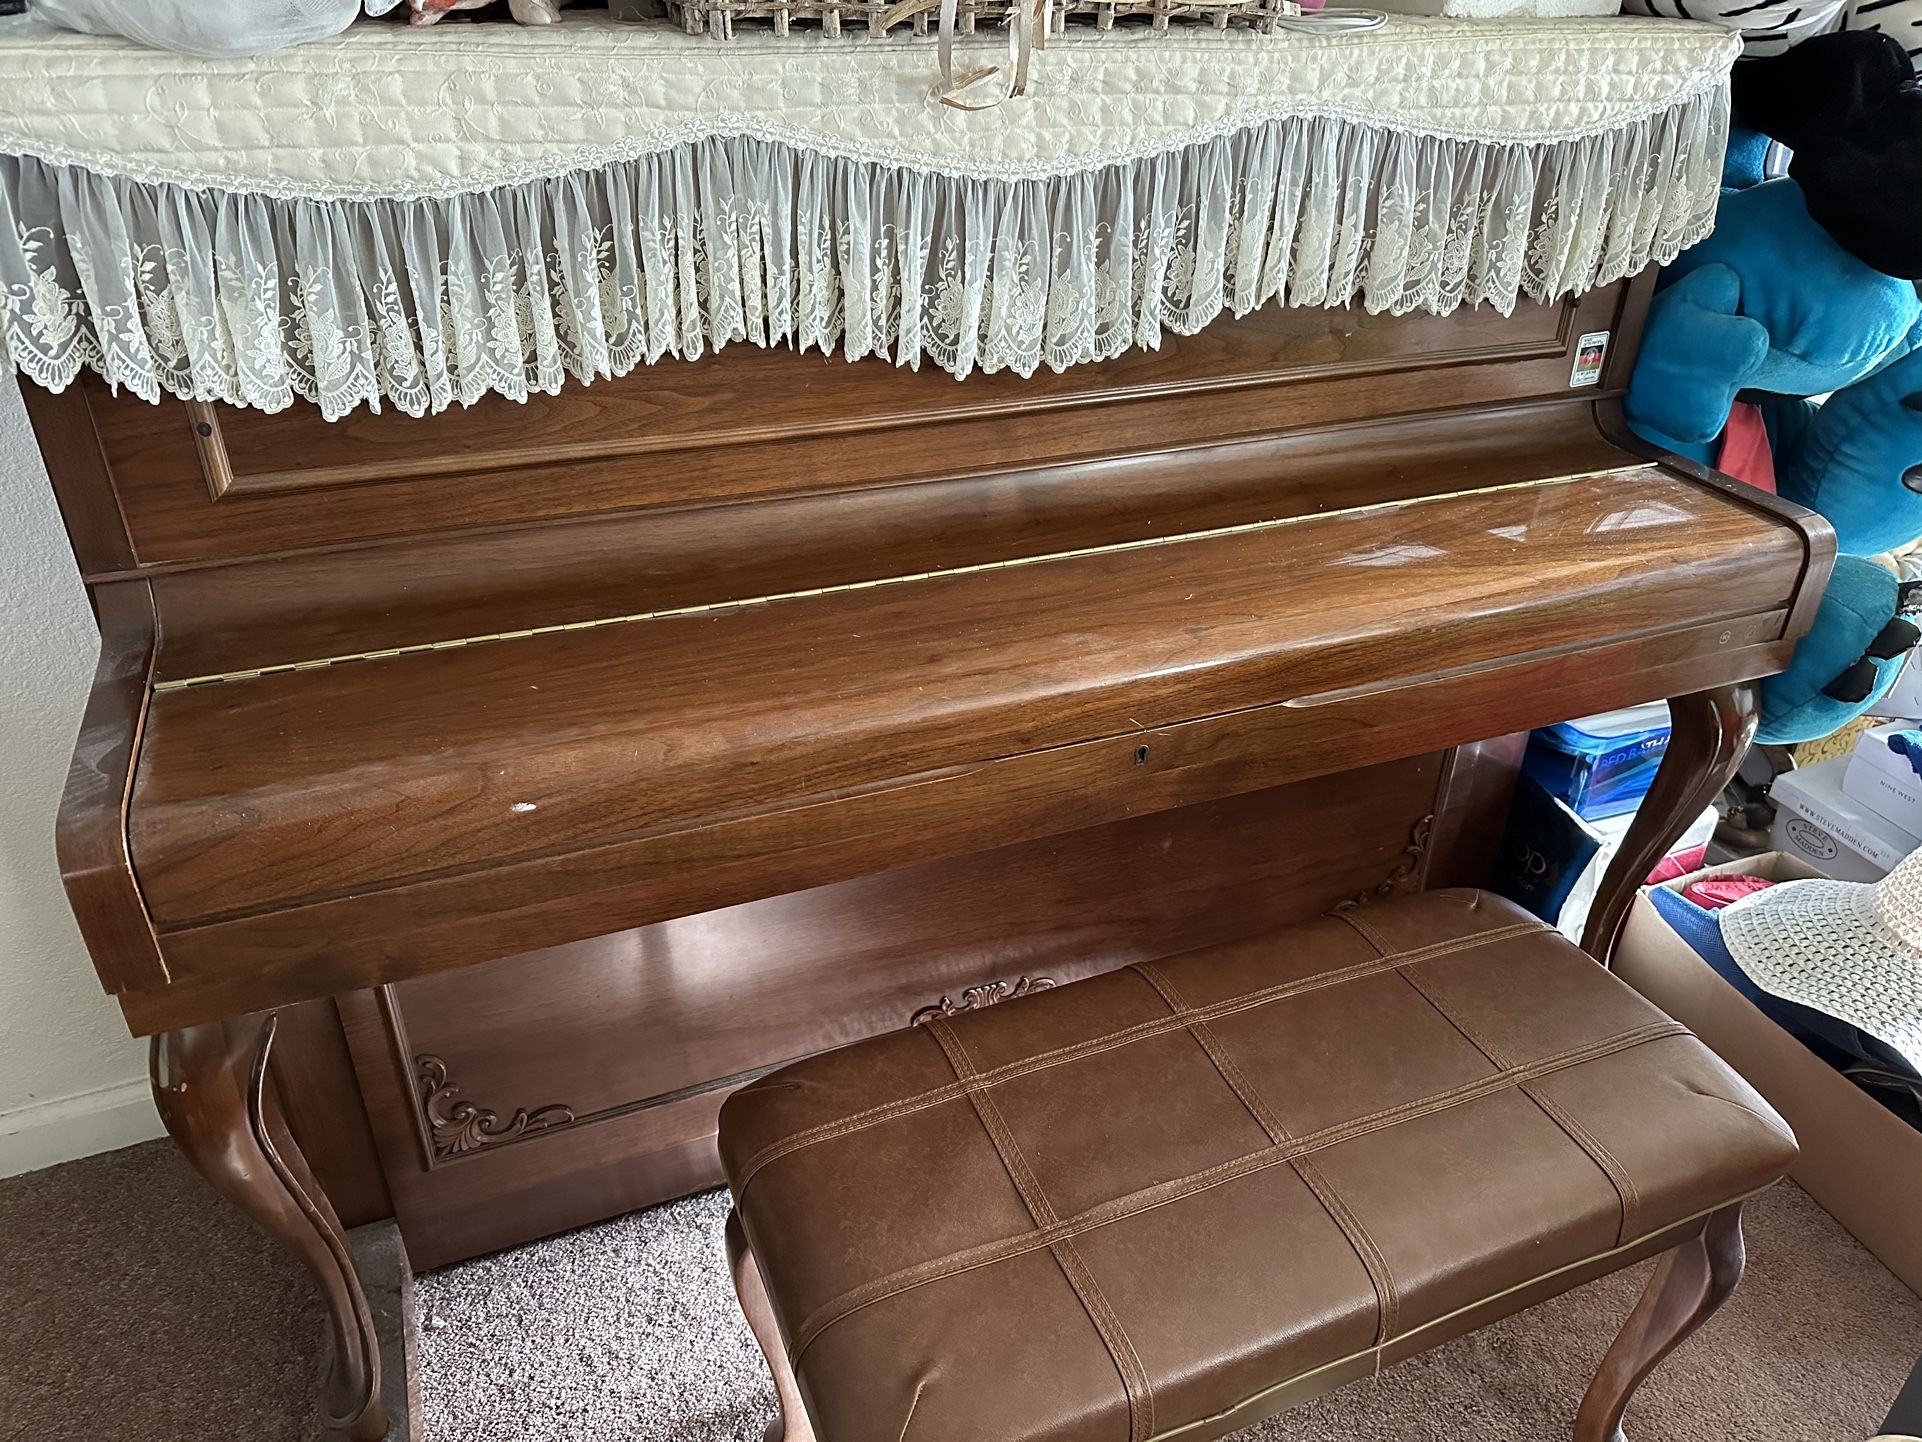 Samick Upright Piano And Bench Excellent Condition In-Tune